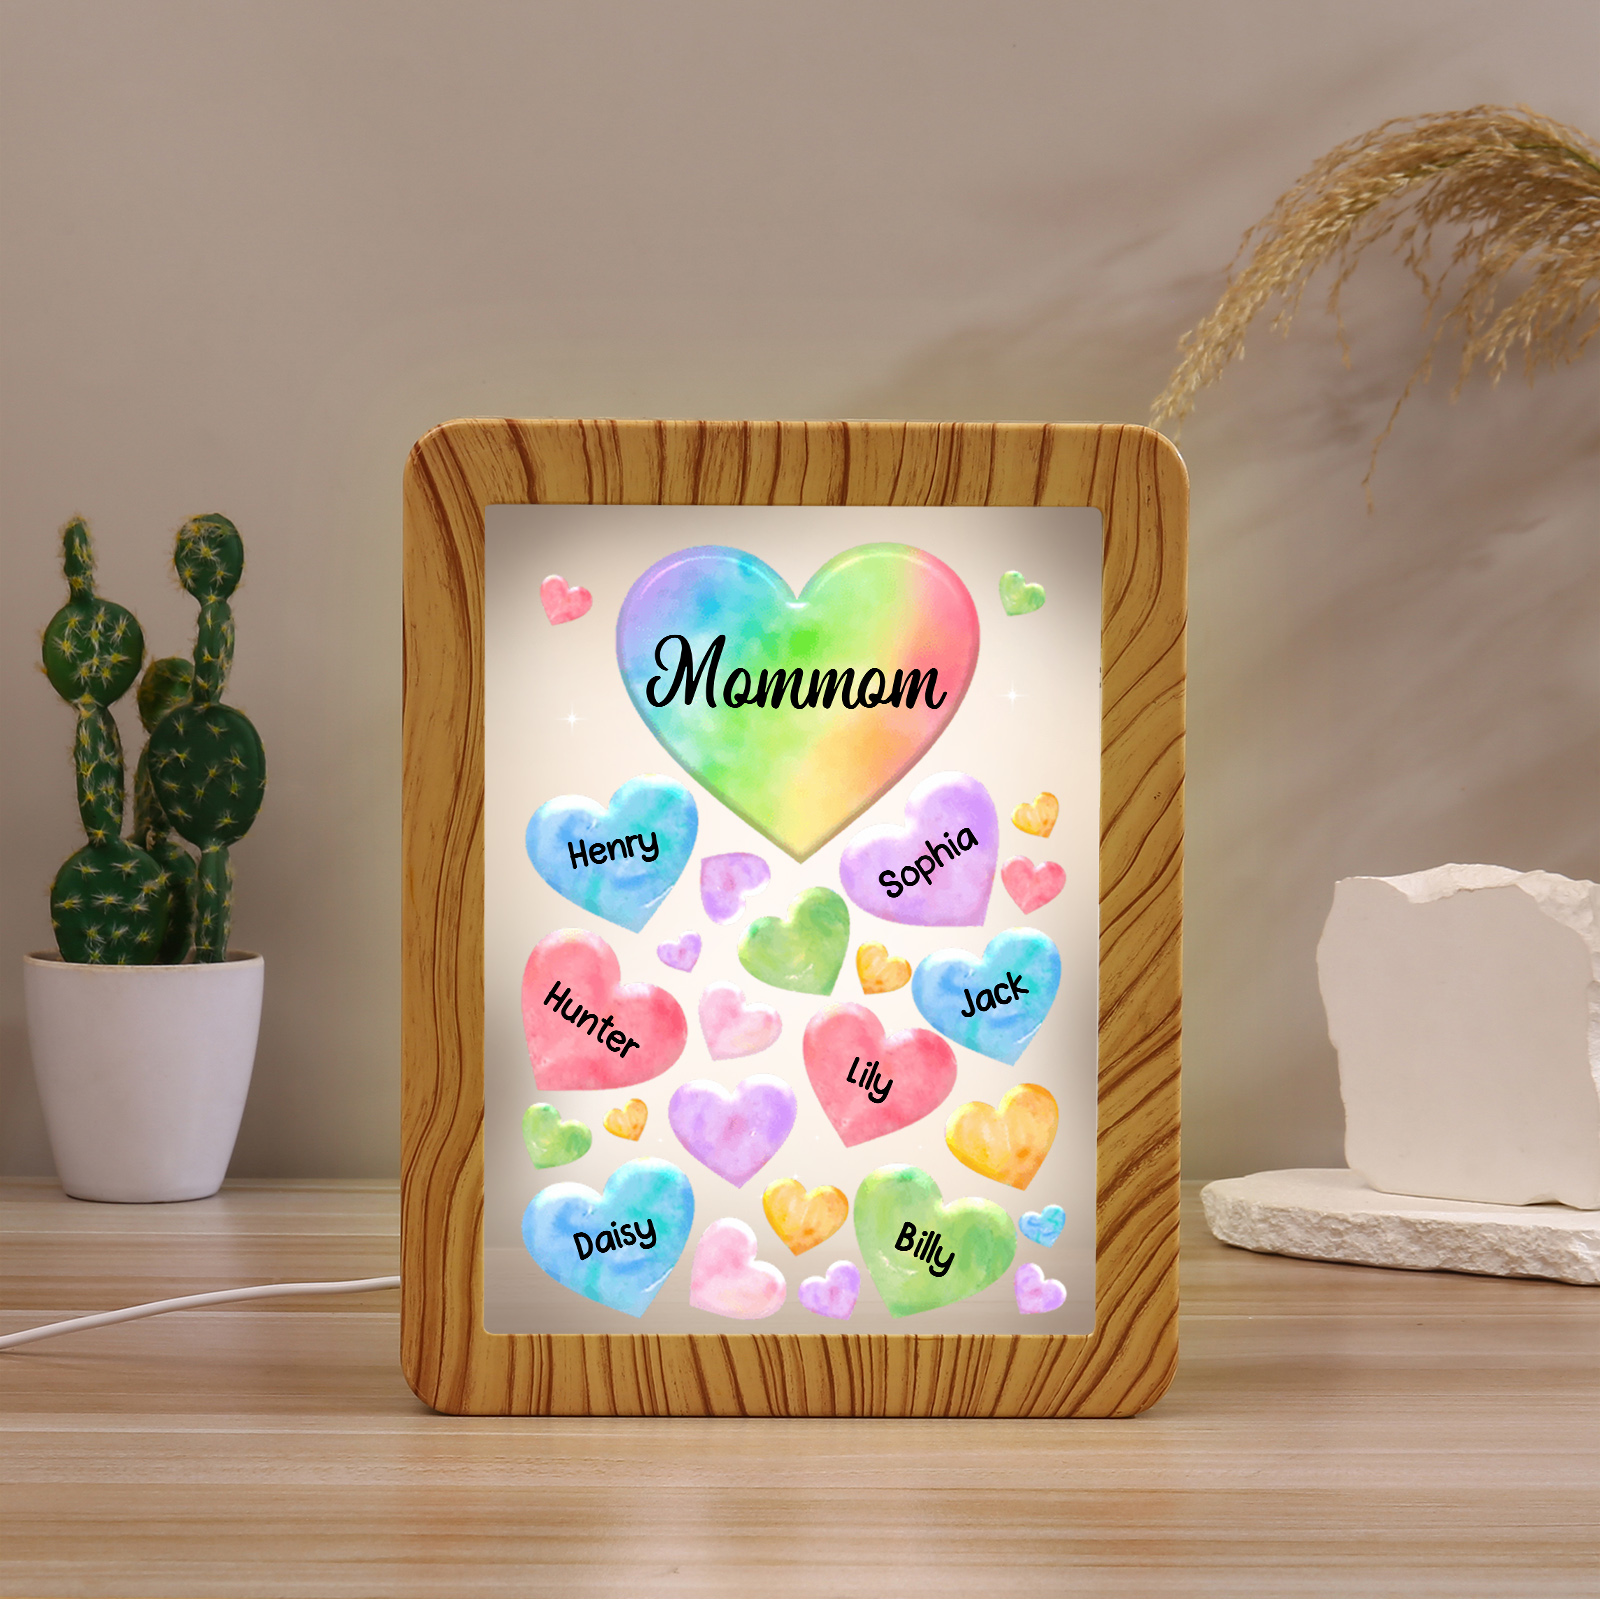 7 Name - Personalized Mum Home Wood Color Plug-in Mirror Photo Frame Custom Text LED Night Light Gift for Mum